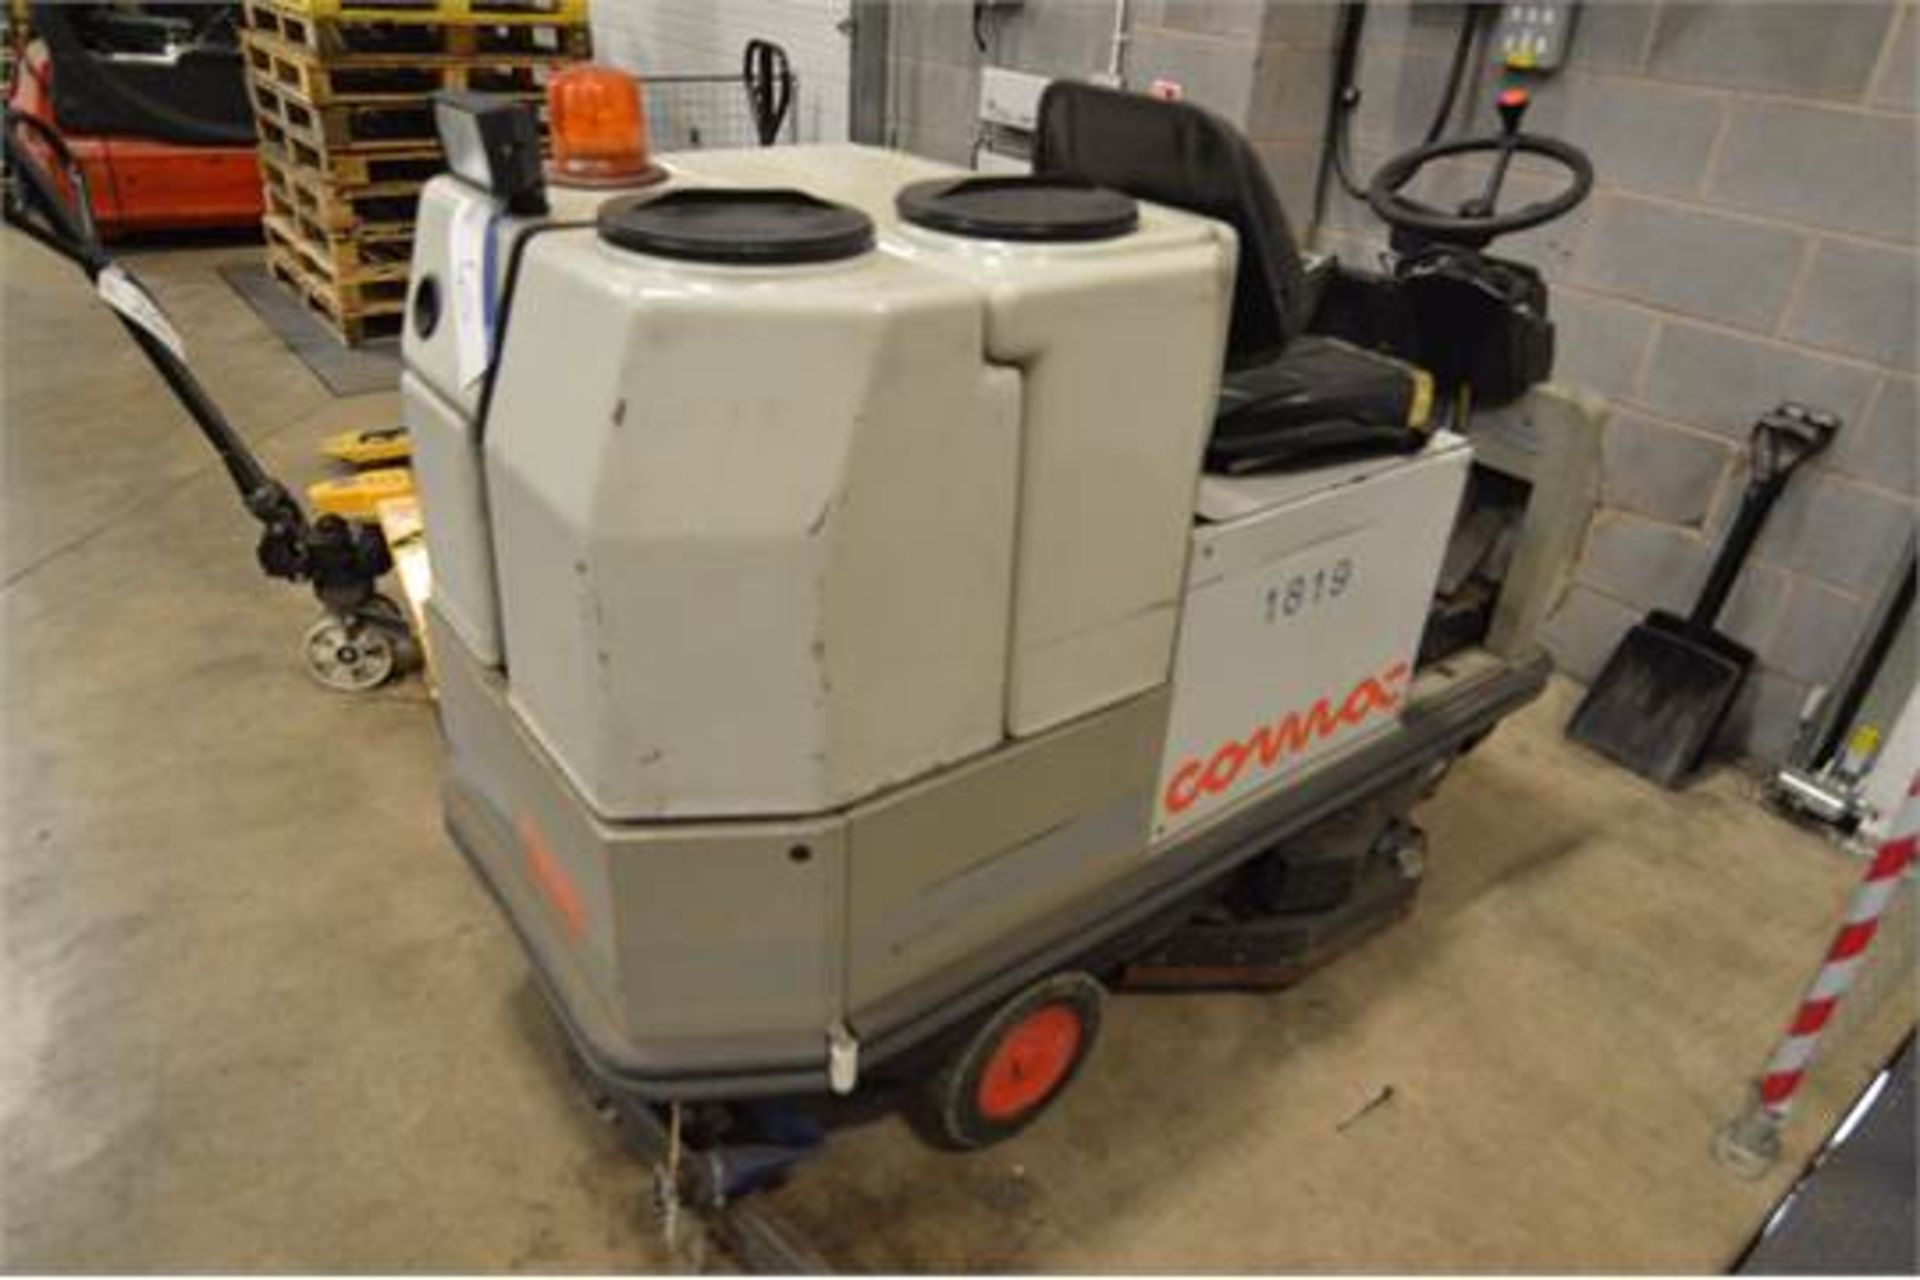 Comac C85B Ride On Floor Cleaning Machine - Image 4 of 5